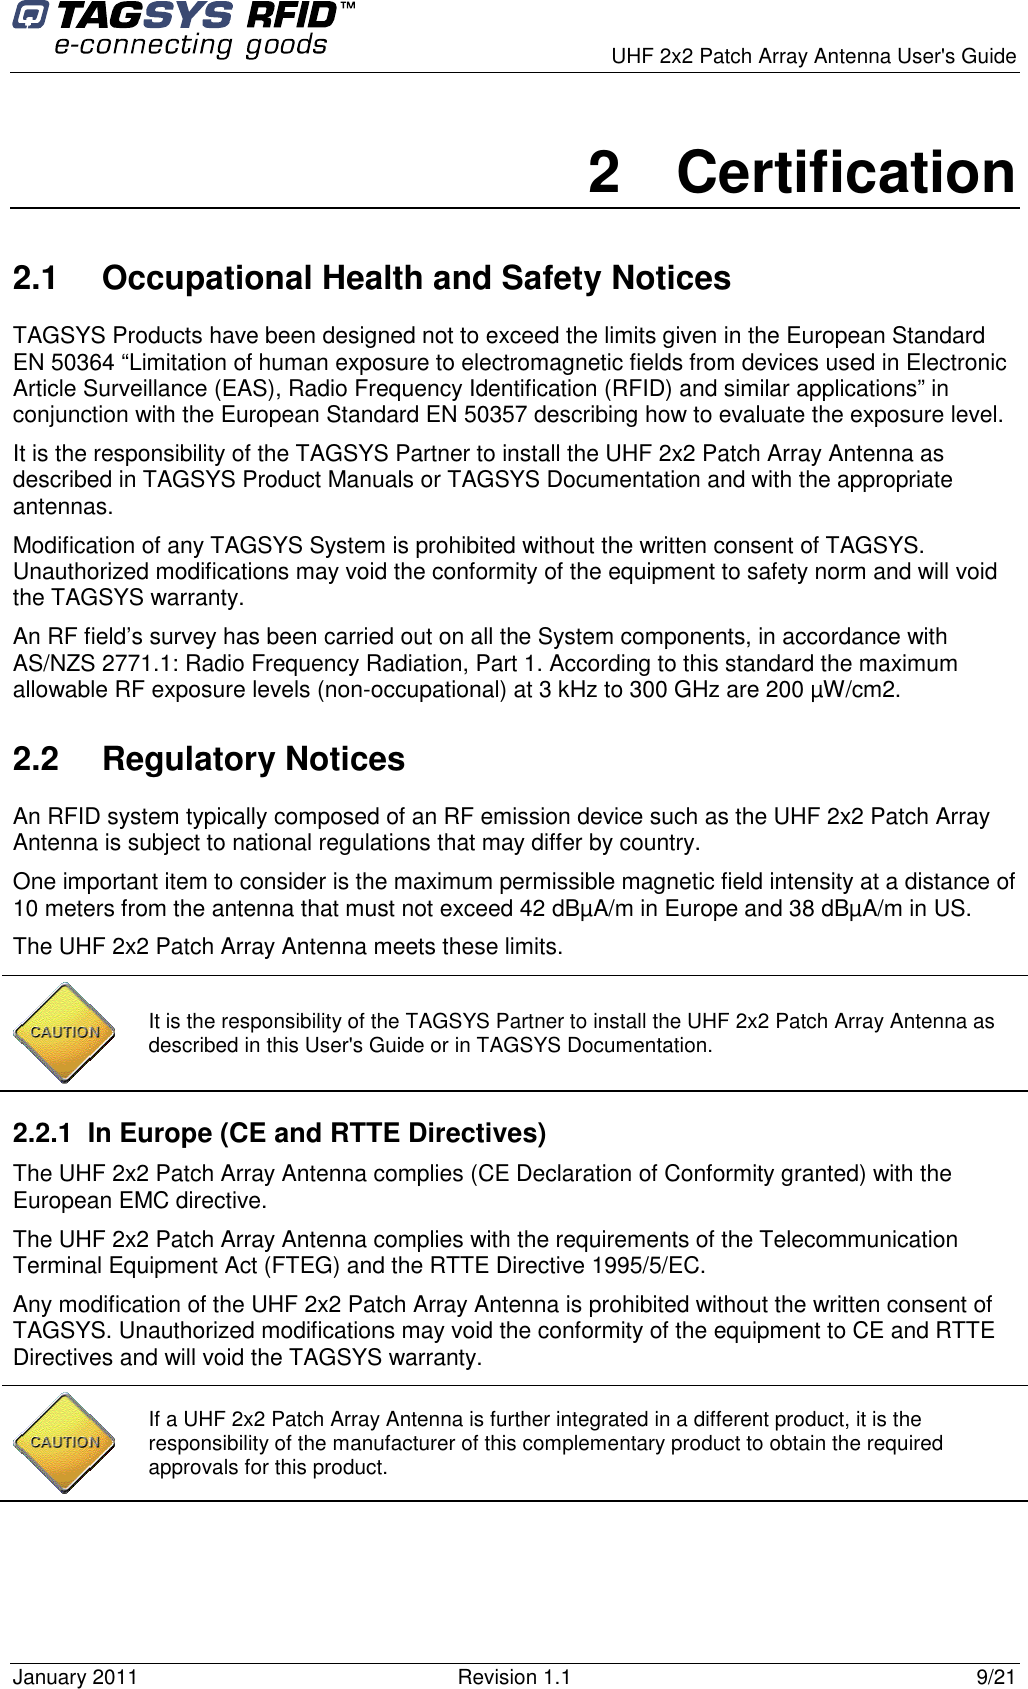      UHF 2x2 Patch Array Antenna User&apos;s Guide January 2011  Revision 1.1  9/21 2  Certification 2.1  Occupational Health and Safety Notices TAGSYS Products have been designed not to exceed the limits given in the European Standard EN 50364 “Limitation of human exposure to electromagnetic fields from devices used in Electronic Article Surveillance (EAS), Radio Frequency Identification (RFID) and similar applications” in conjunction with the European Standard EN 50357 describing how to evaluate the exposure level. It is the responsibility of the TAGSYS Partner to install the UHF 2x2 Patch Array Antenna as described in TAGSYS Product Manuals or TAGSYS Documentation and with the appropriate antennas.  Modification of any TAGSYS System is prohibited without the written consent of TAGSYS. Unauthorized modifications may void the conformity of the equipment to safety norm and will void the TAGSYS warranty. An RF field’s survey has been carried out on all the System components, in accordance with AS/NZS 2771.1: Radio Frequency Radiation, Part 1. According to this standard the maximum allowable RF exposure levels (non-occupational) at 3 kHz to 300 GHz are 200 µW/cm2.  2.2  Regulatory Notices An RFID system typically composed of an RF emission device such as the UHF 2x2 Patch Array Antenna is subject to national regulations that may differ by country. One important item to consider is the maximum permissible magnetic field intensity at a distance of 10 meters from the antenna that must not exceed 42 dBµA/m in Europe and 38 dBµA/m in US. The UHF 2x2 Patch Array Antenna meets these limits. 2.2.1  In Europe (CE and RTTE Directives)  The UHF 2x2 Patch Array Antenna complies (CE Declaration of Conformity granted) with the European EMC directive. The UHF 2x2 Patch Array Antenna complies with the requirements of the Telecommunication Terminal Equipment Act (FTEG) and the RTTE Directive 1995/5/EC. Any modification of the UHF 2x2 Patch Array Antenna is prohibited without the written consent of TAGSYS. Unauthorized modifications may void the conformity of the equipment to CE and RTTE Directives and will void the TAGSYS warranty.   It is the responsibility of the TAGSYS Partner to install the UHF 2x2 Patch Array Antenna as described in this User&apos;s Guide or in TAGSYS Documentation.  If a UHF 2x2 Patch Array Antenna is further integrated in a different product, it is the responsibility of the manufacturer of this complementary product to obtain the required approvals for this product. 